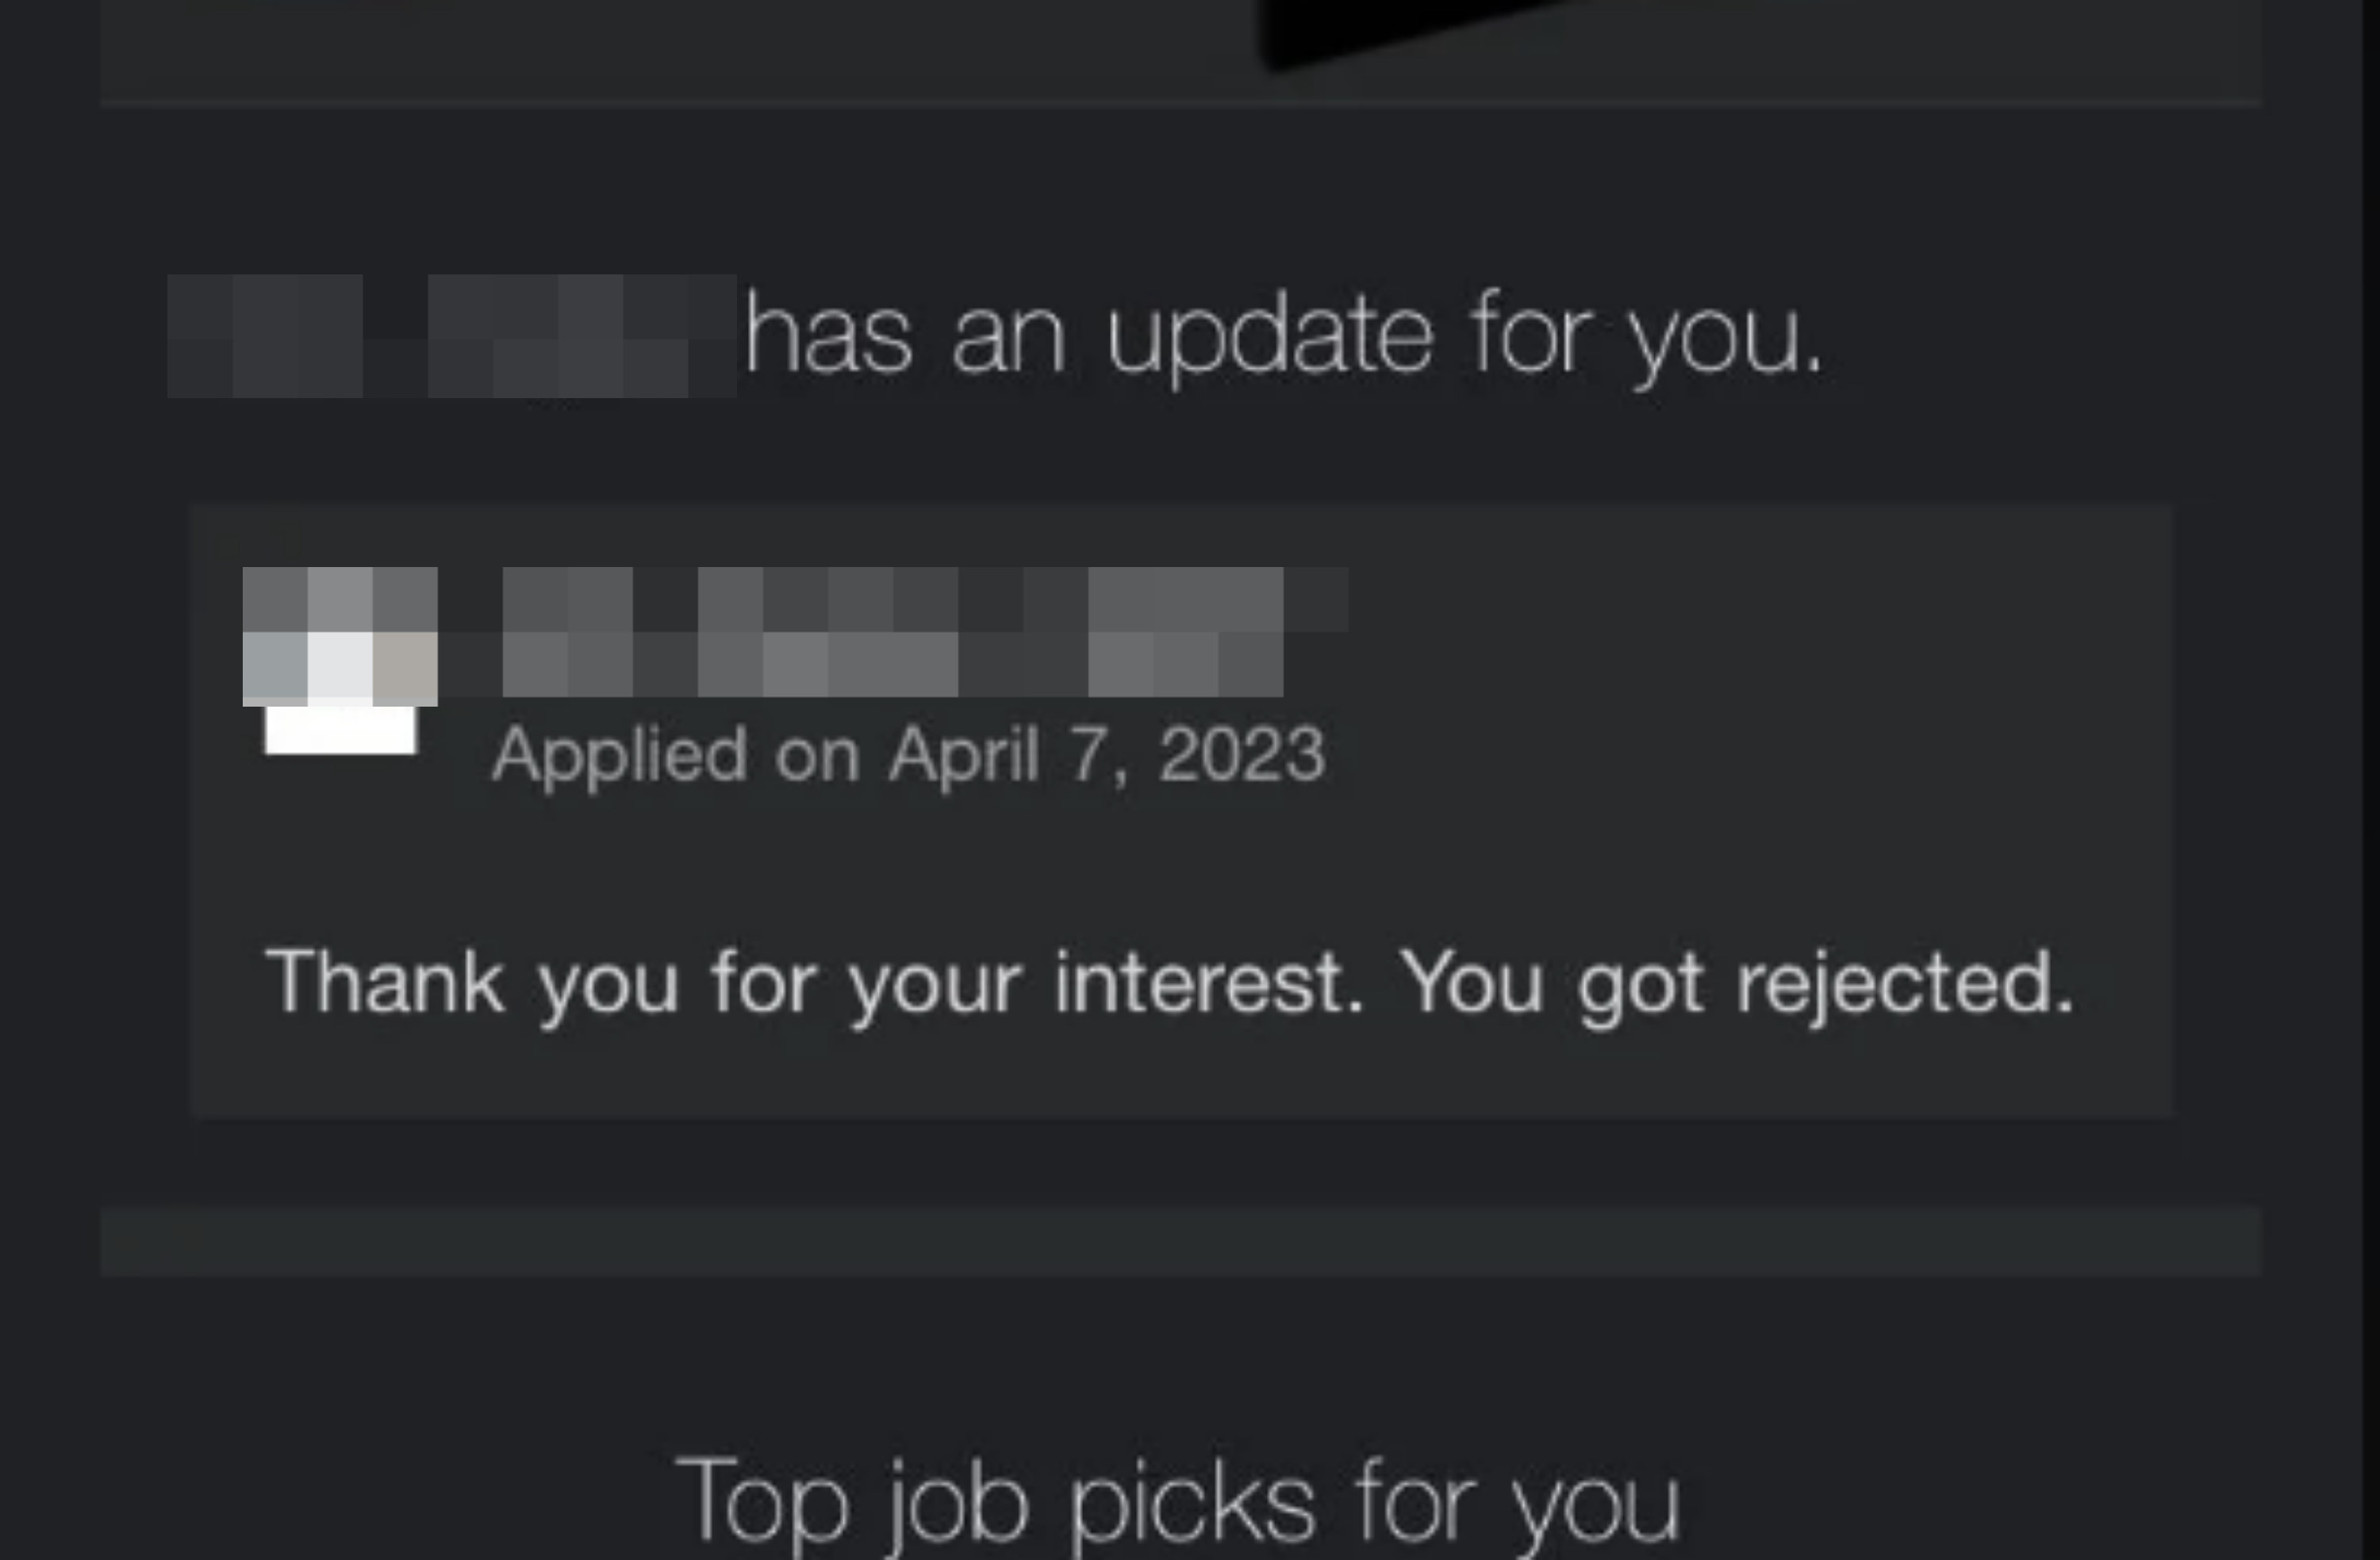 The message simply says &quot;thank you for your interest, you got rejected&quot;